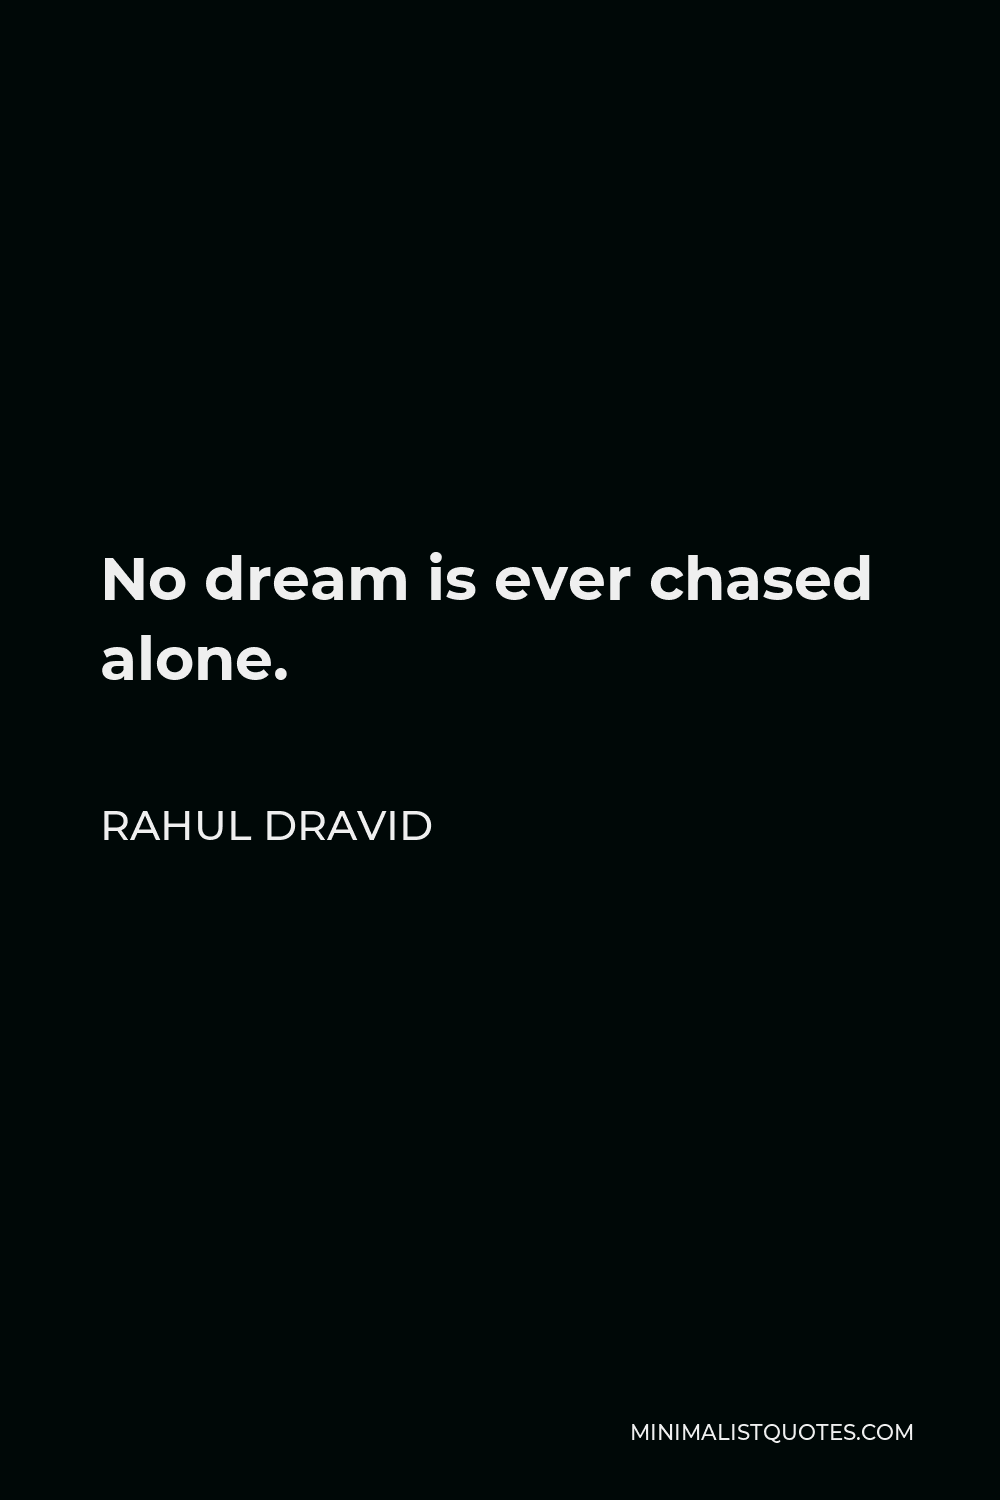 Rahul Dravid Quote - No dream is ever chased alone.